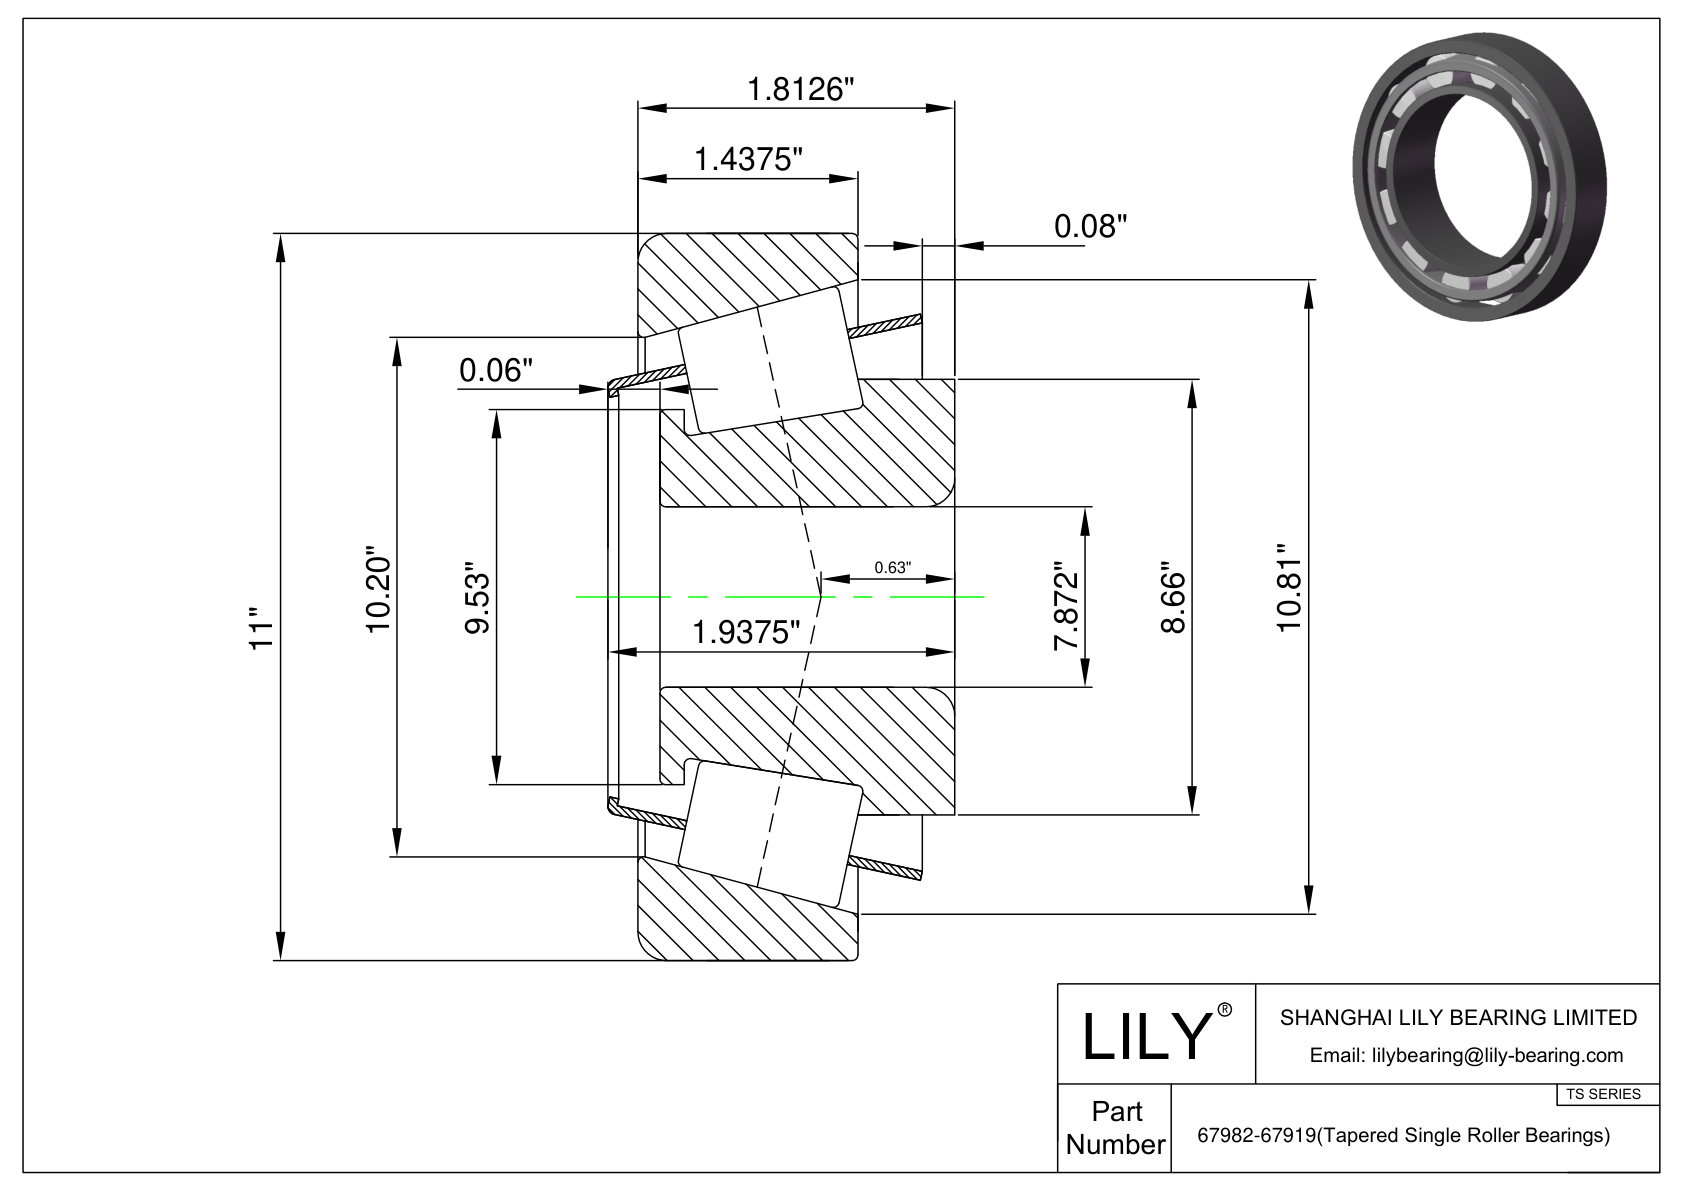 67982-67919 TS (Tapered Single Roller Bearings) (Imperial) cad drawing